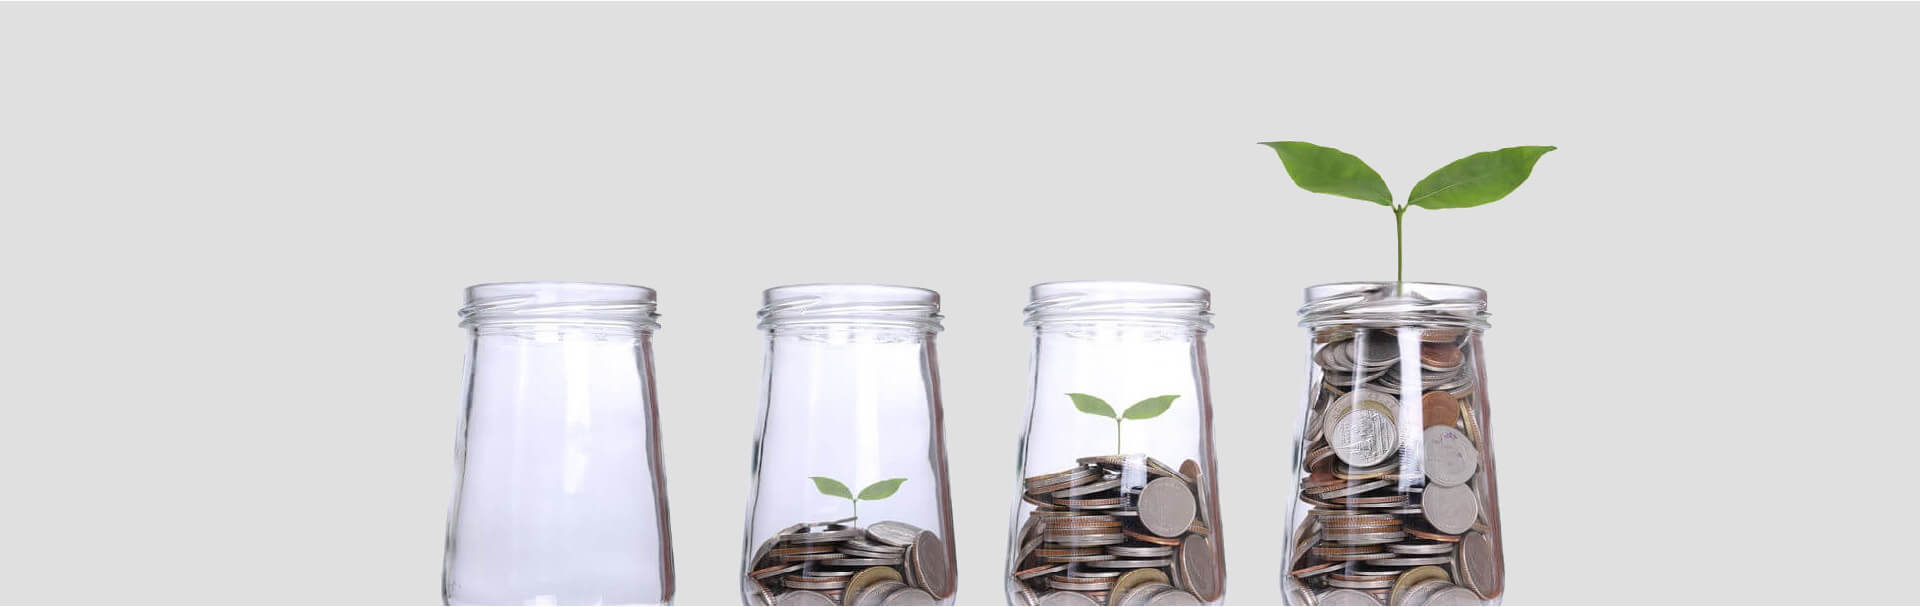 Coins in a small jar with a plant growing